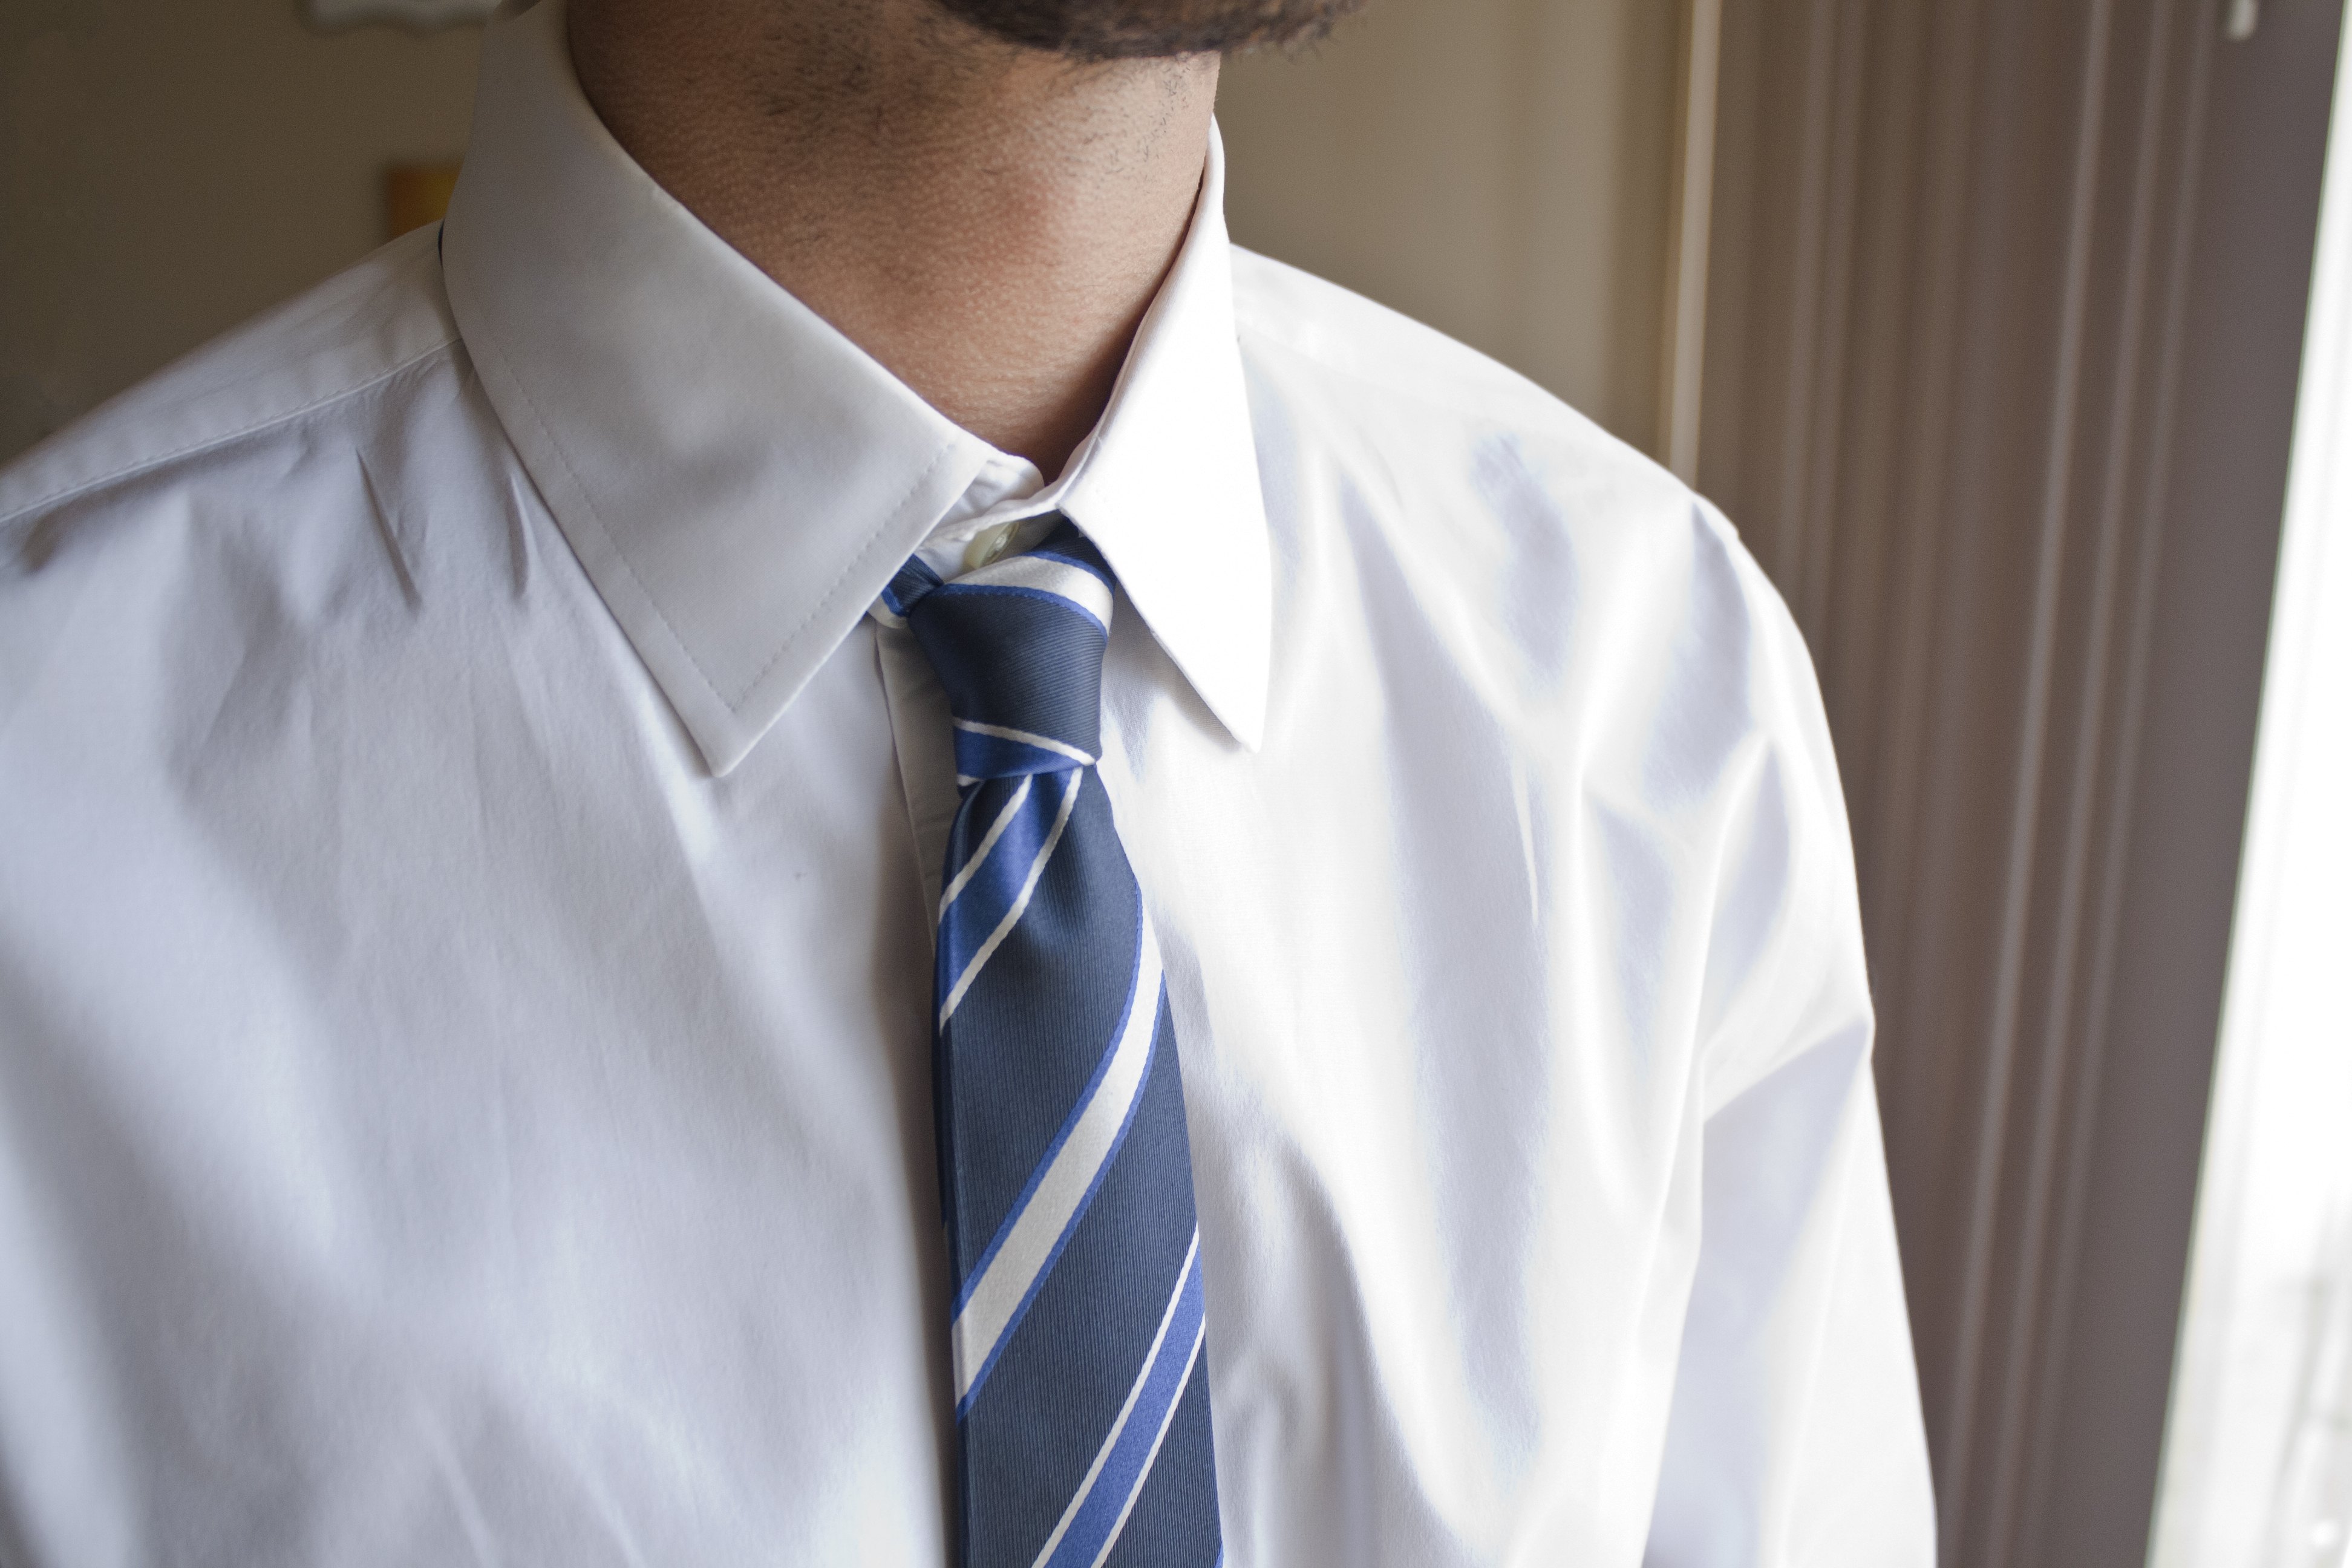 How to Tie a Necktie Step-by-Step (with Pictures) | eHow